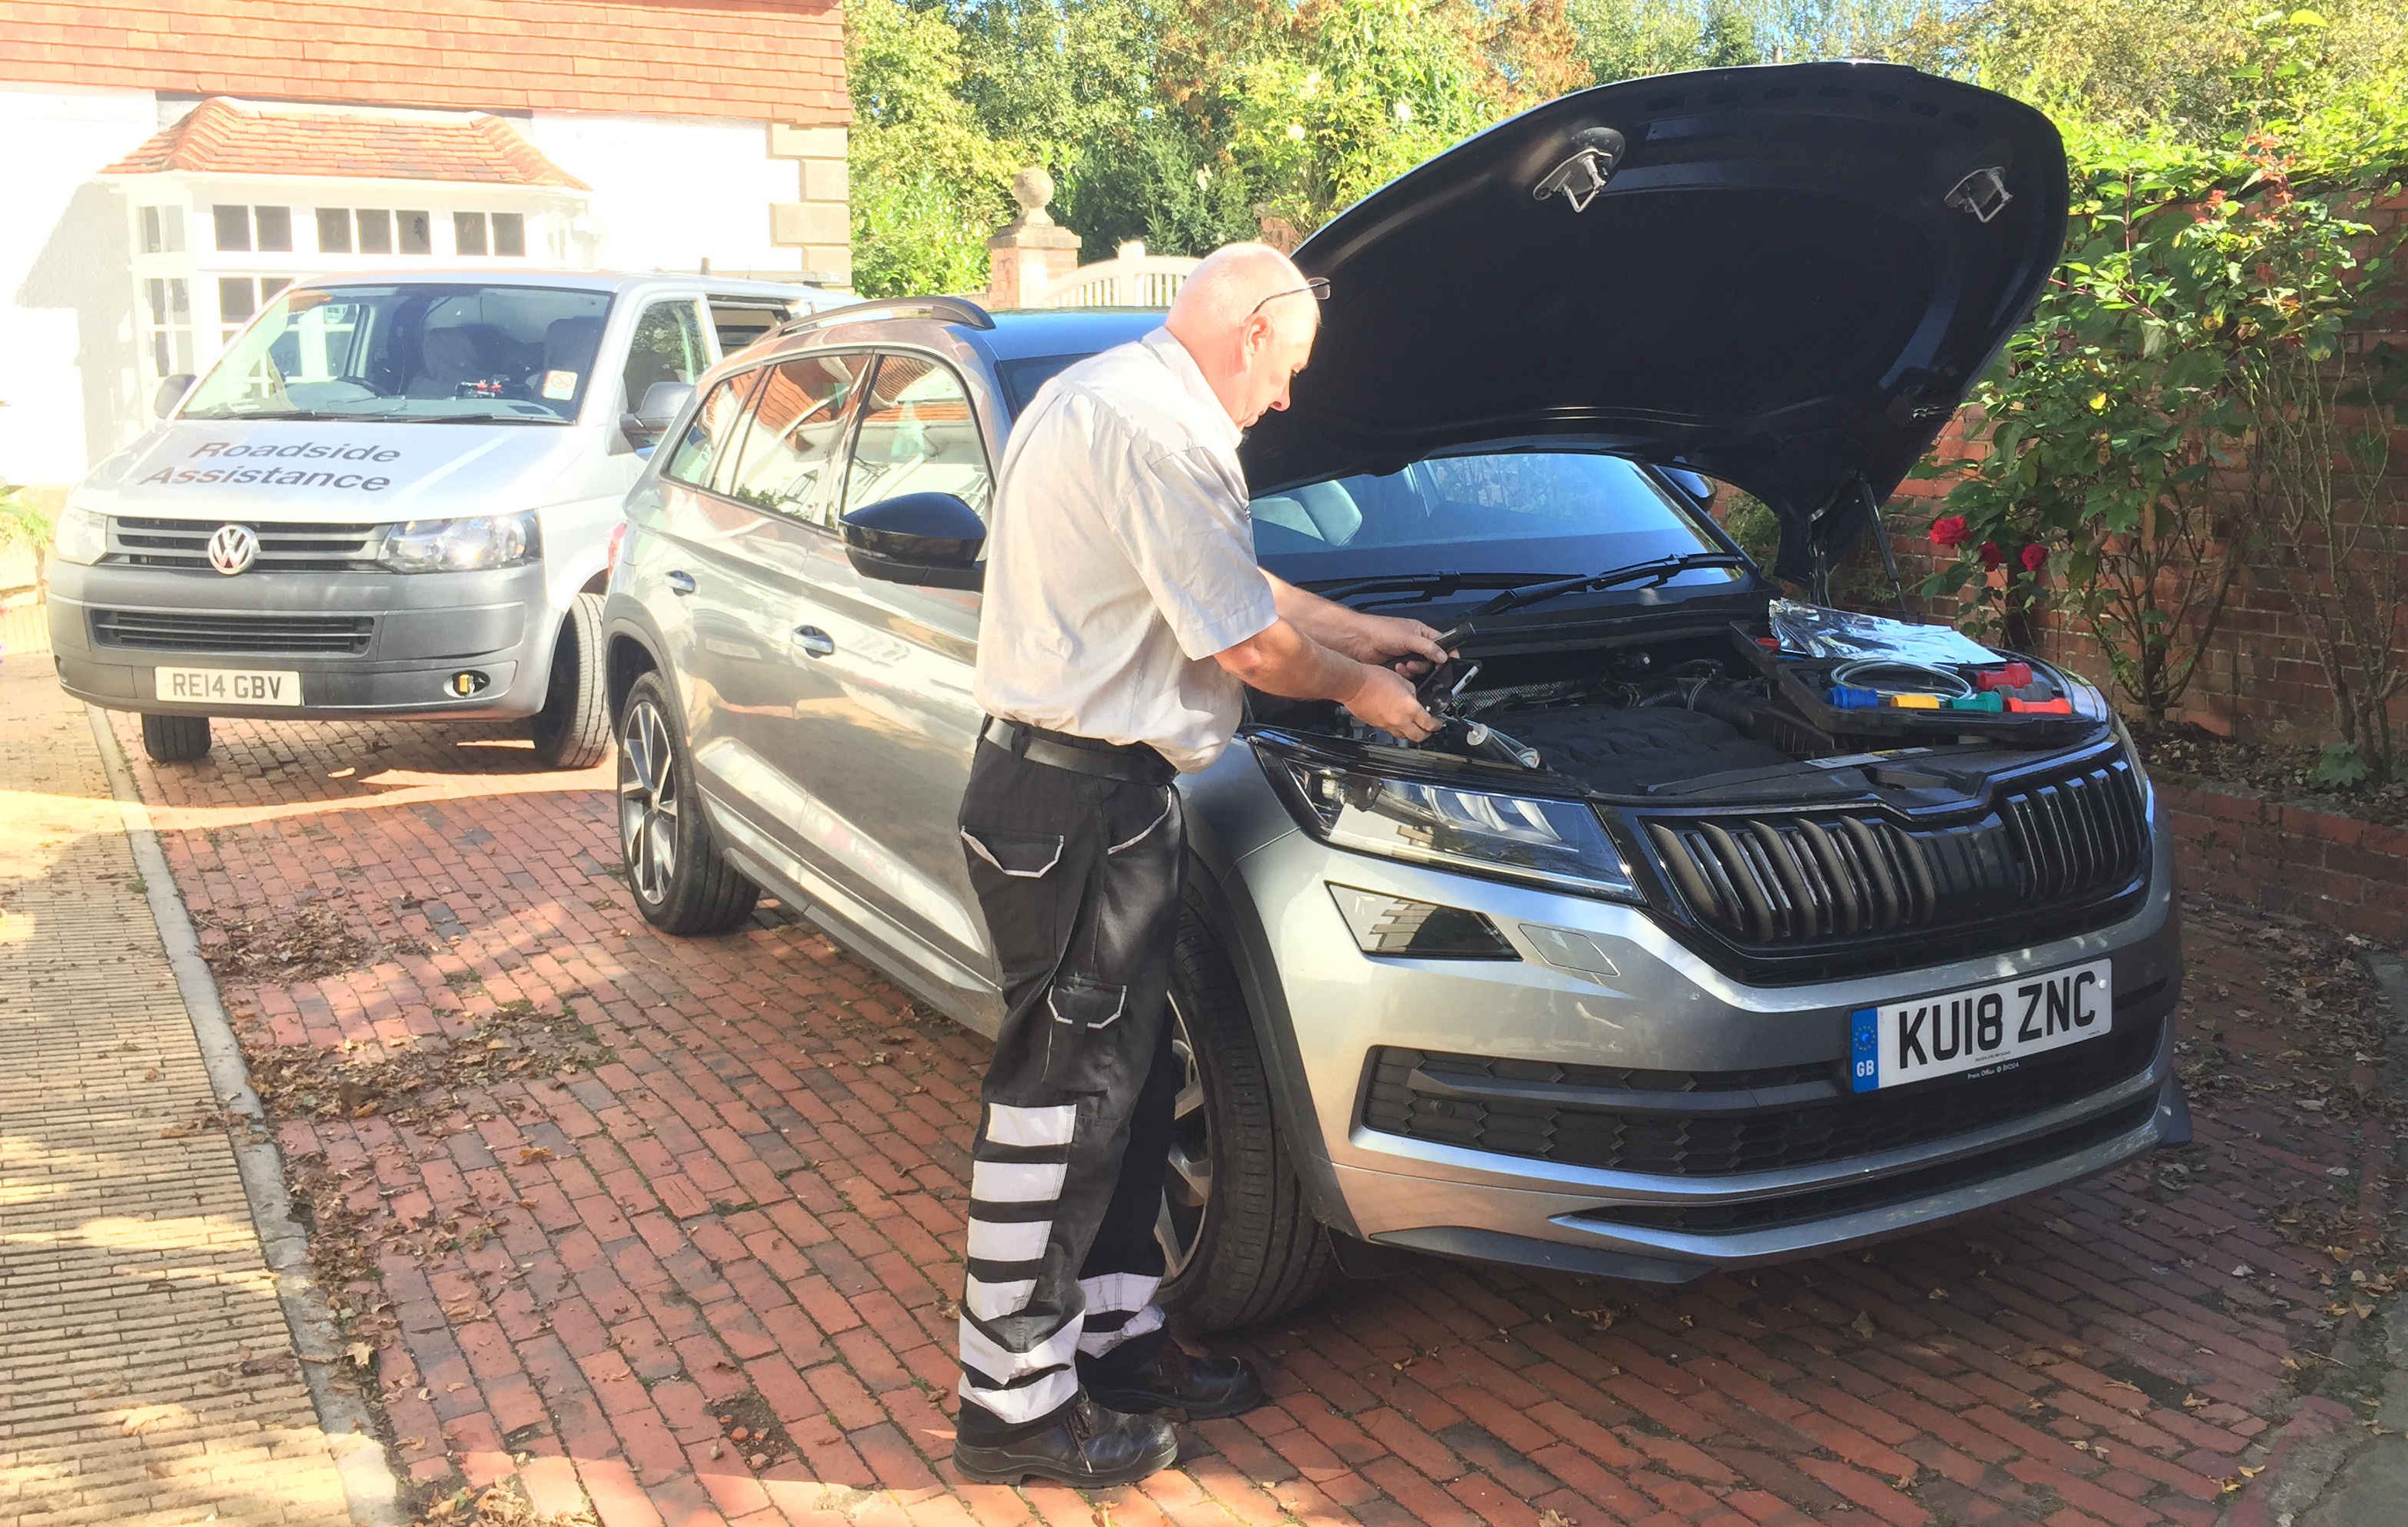 Skoda Kodiaq long-term test review - coolant failure fixed by VW Group Roadside Assistance - James Mills for Driving.co.uk